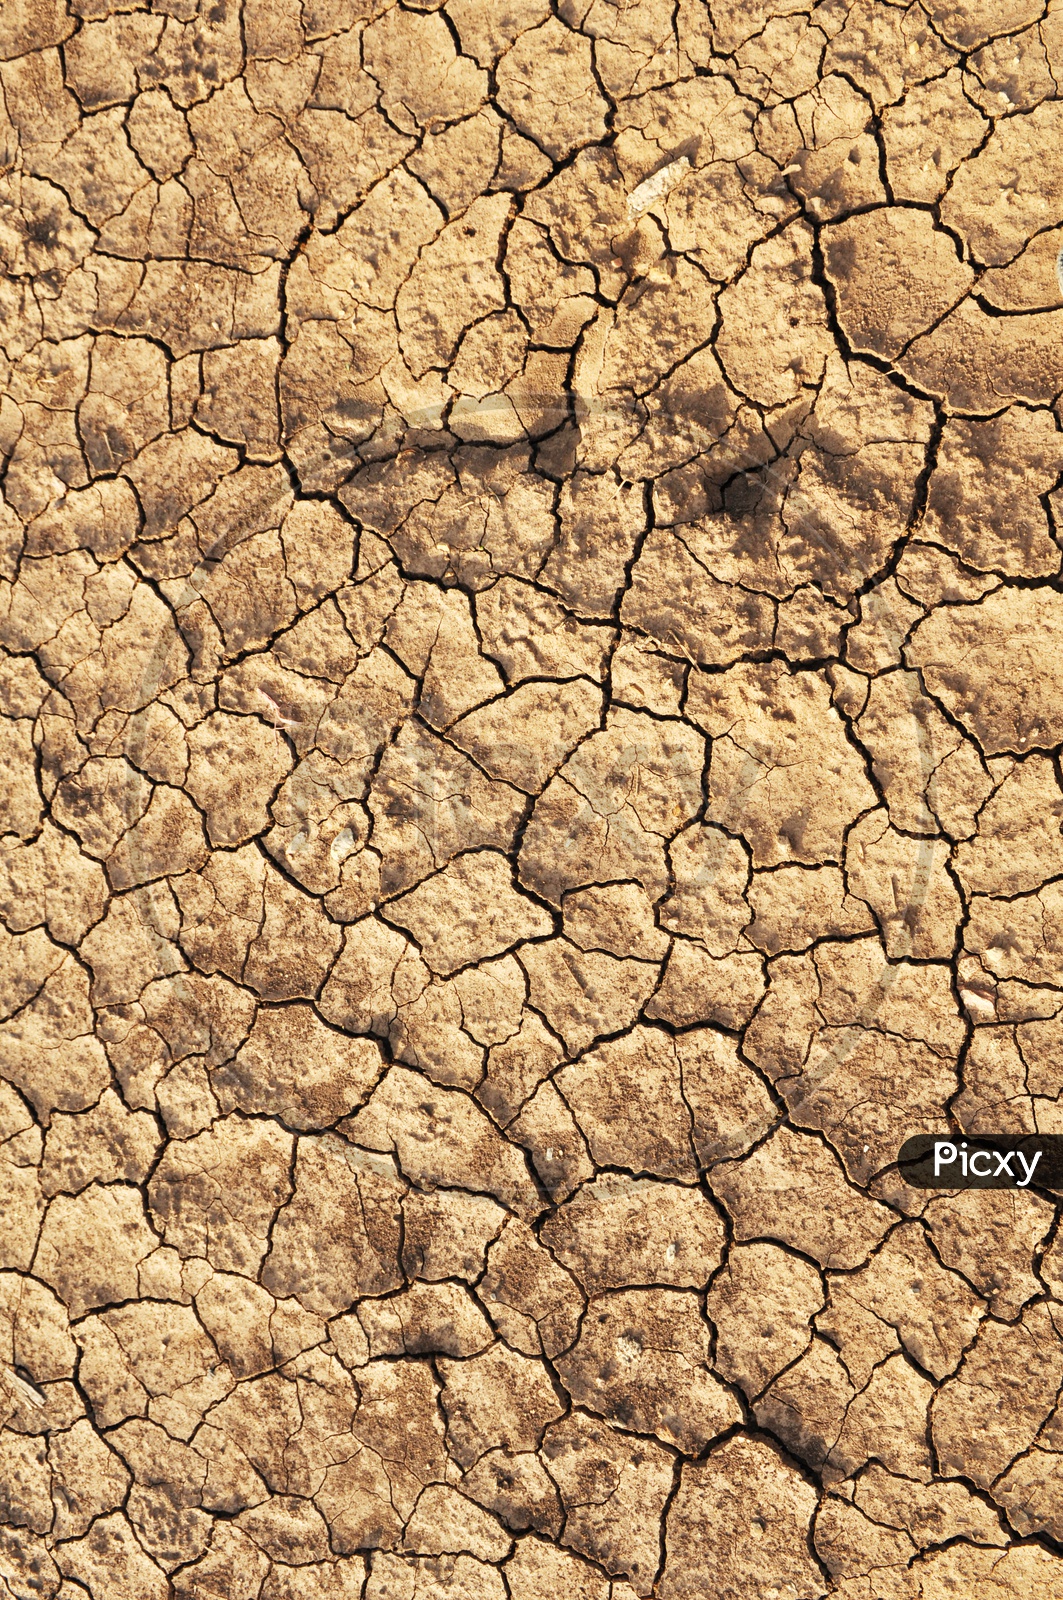 Drought Lands Or Dried Cracked Soil Closeup Forming a Background